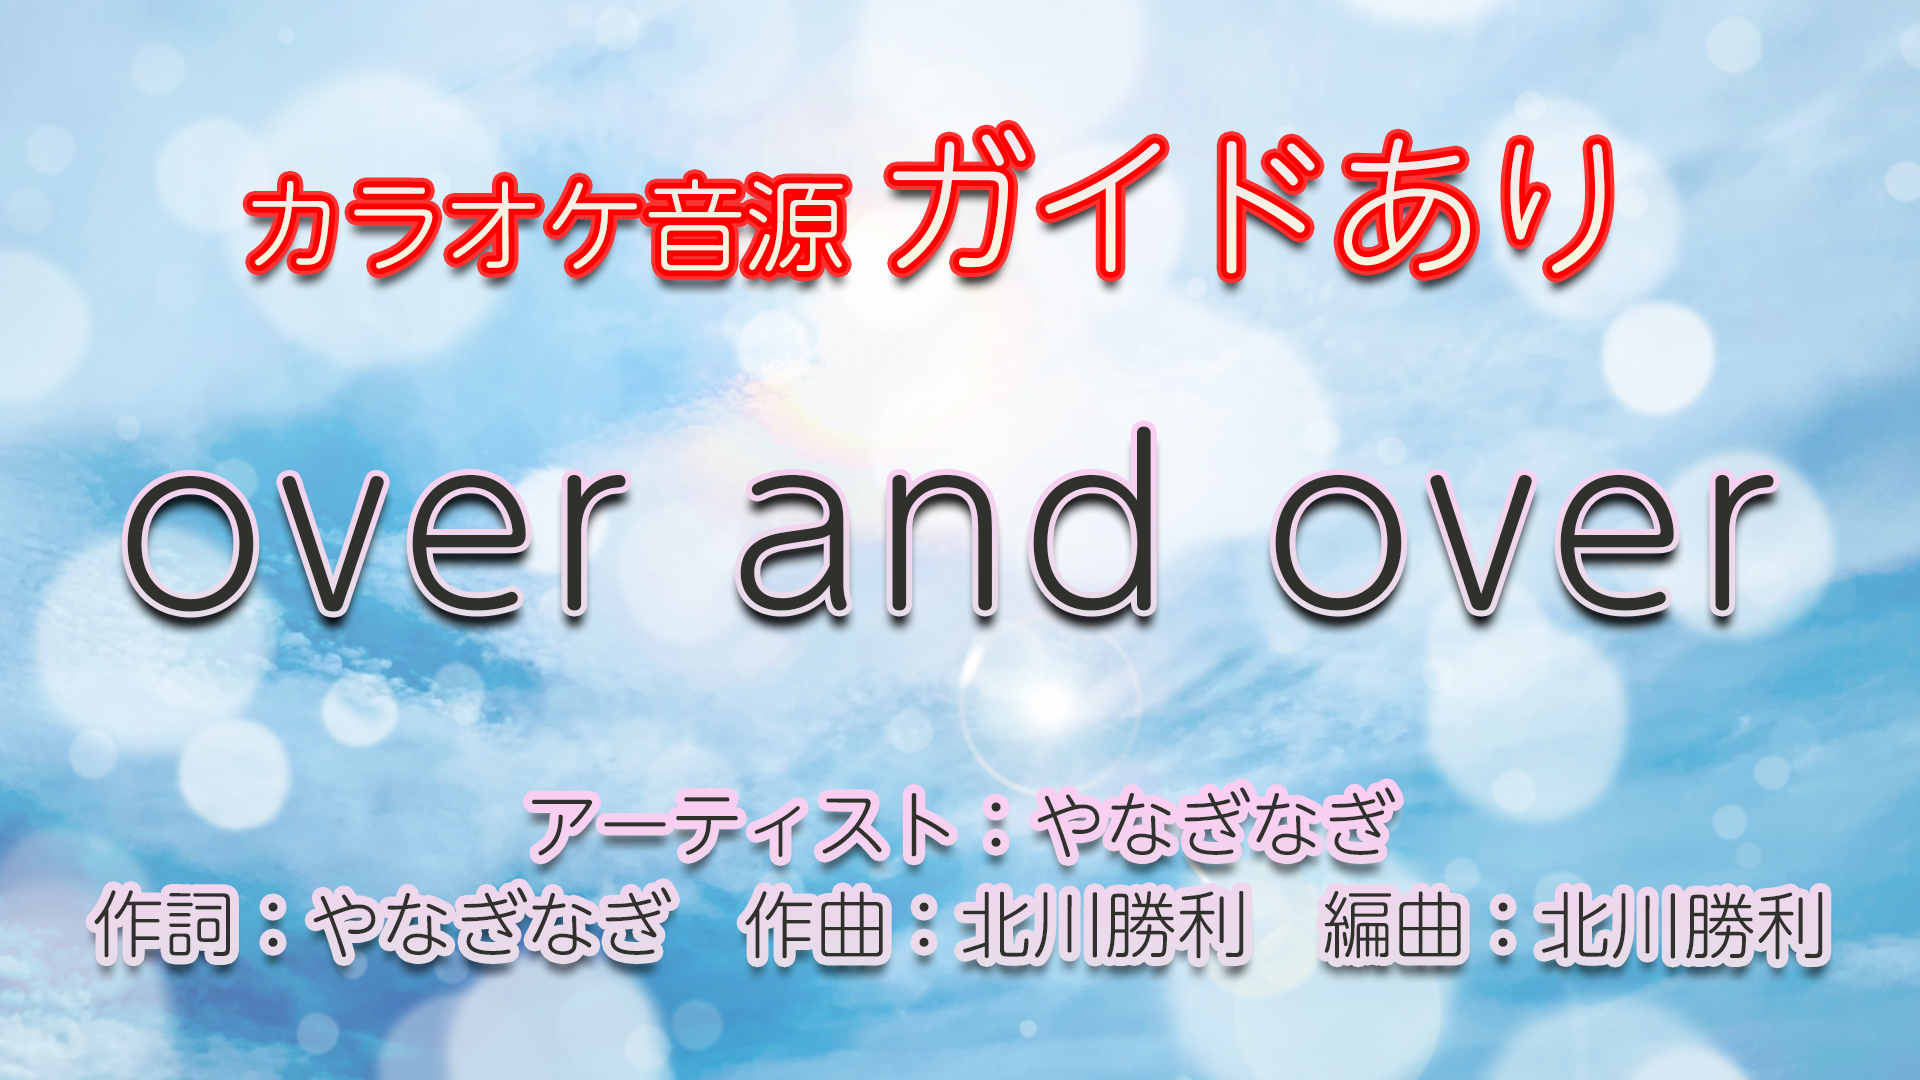 over and over / やなぎなぎ